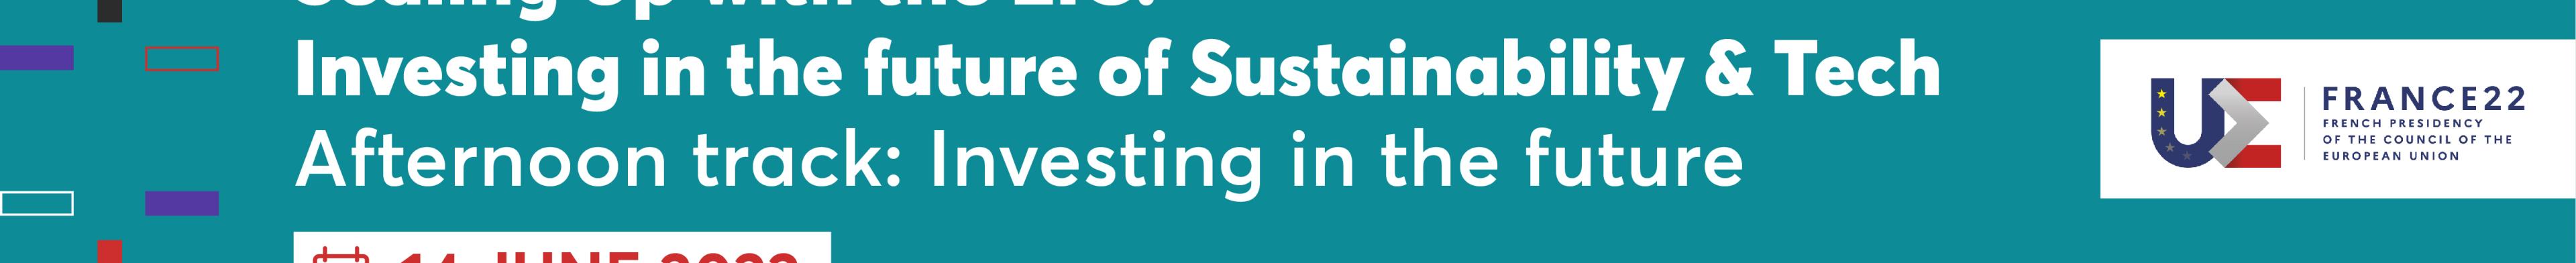 Scaling up with the EIC: Investing in the Future of Sustainability and Tech